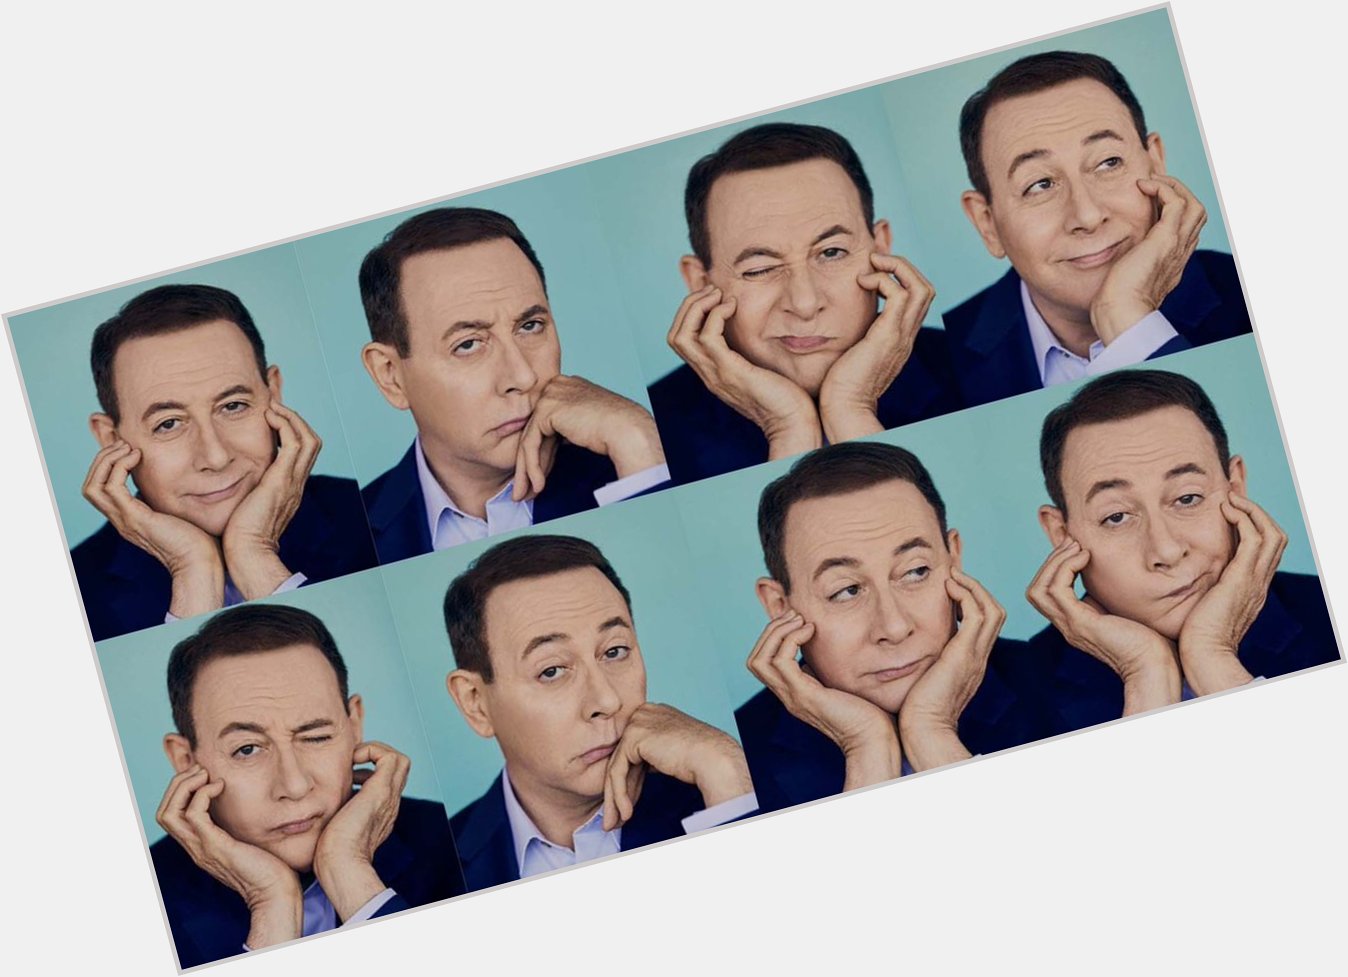 Happy birthday, Paul Reubens. You\re still one of my favorites. 